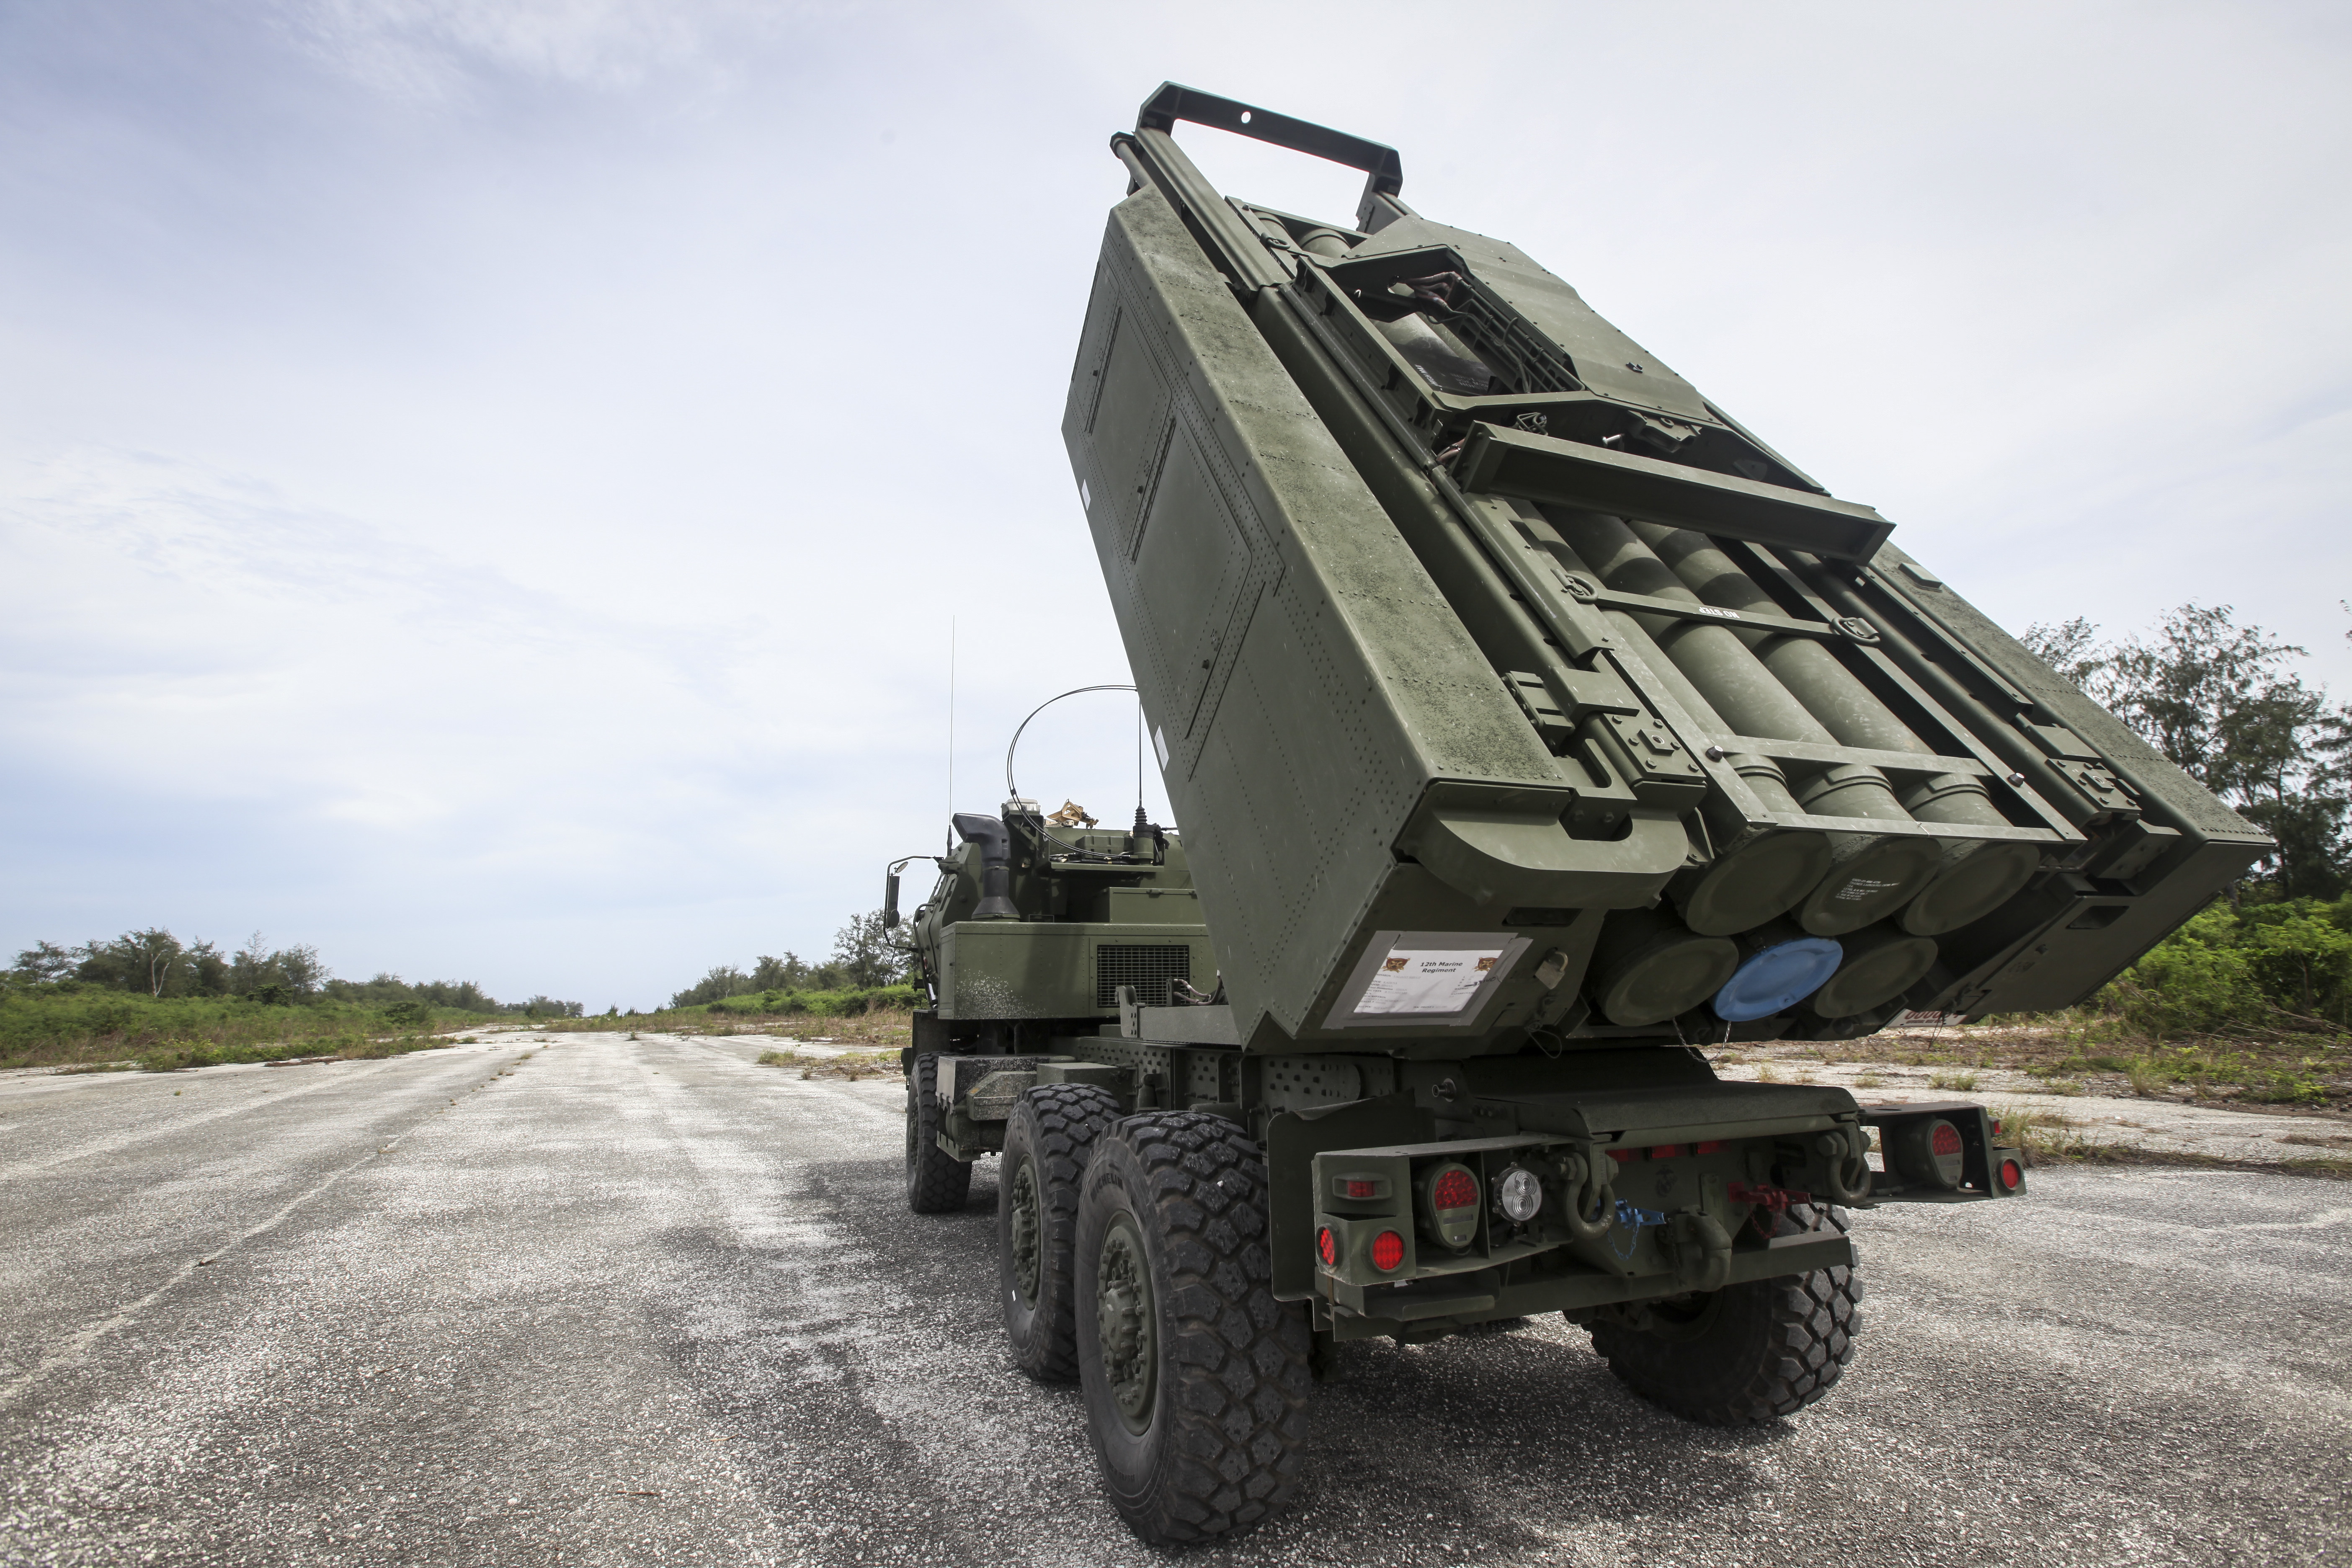 A High Mobility Artillery Rocket System (HIMARS) practices targeting during Valiant Shield 16 on Tinian island in the Northern Marianas, Sept. 21, 2016. The combat rehearsal demonstrated the HIMARS expeditionary capability in support of Valiant Shield, a biennial, U.S. Air Force, Navy, and Marine Corps exercise held in Guam, focusing on real-world proficiency in sustaining joint forces at sea, in the air, on land and in cyberspace. US Marine Corps photo.